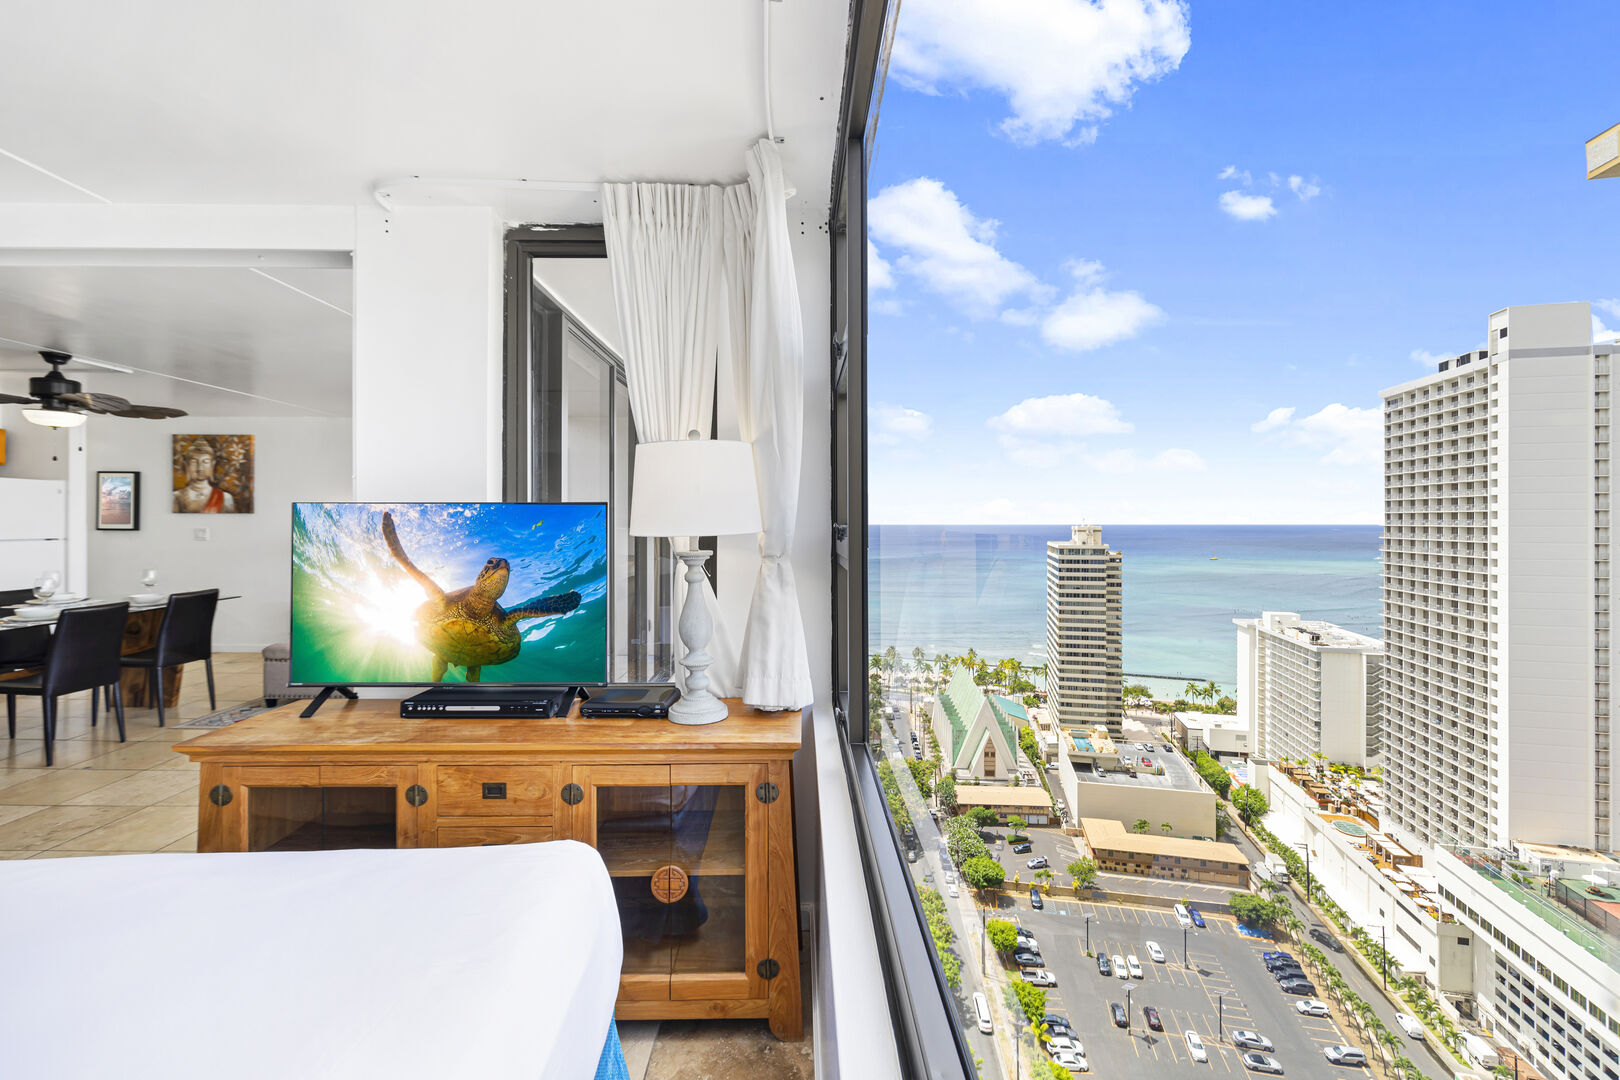 Ocean and City Views from your bedroom!